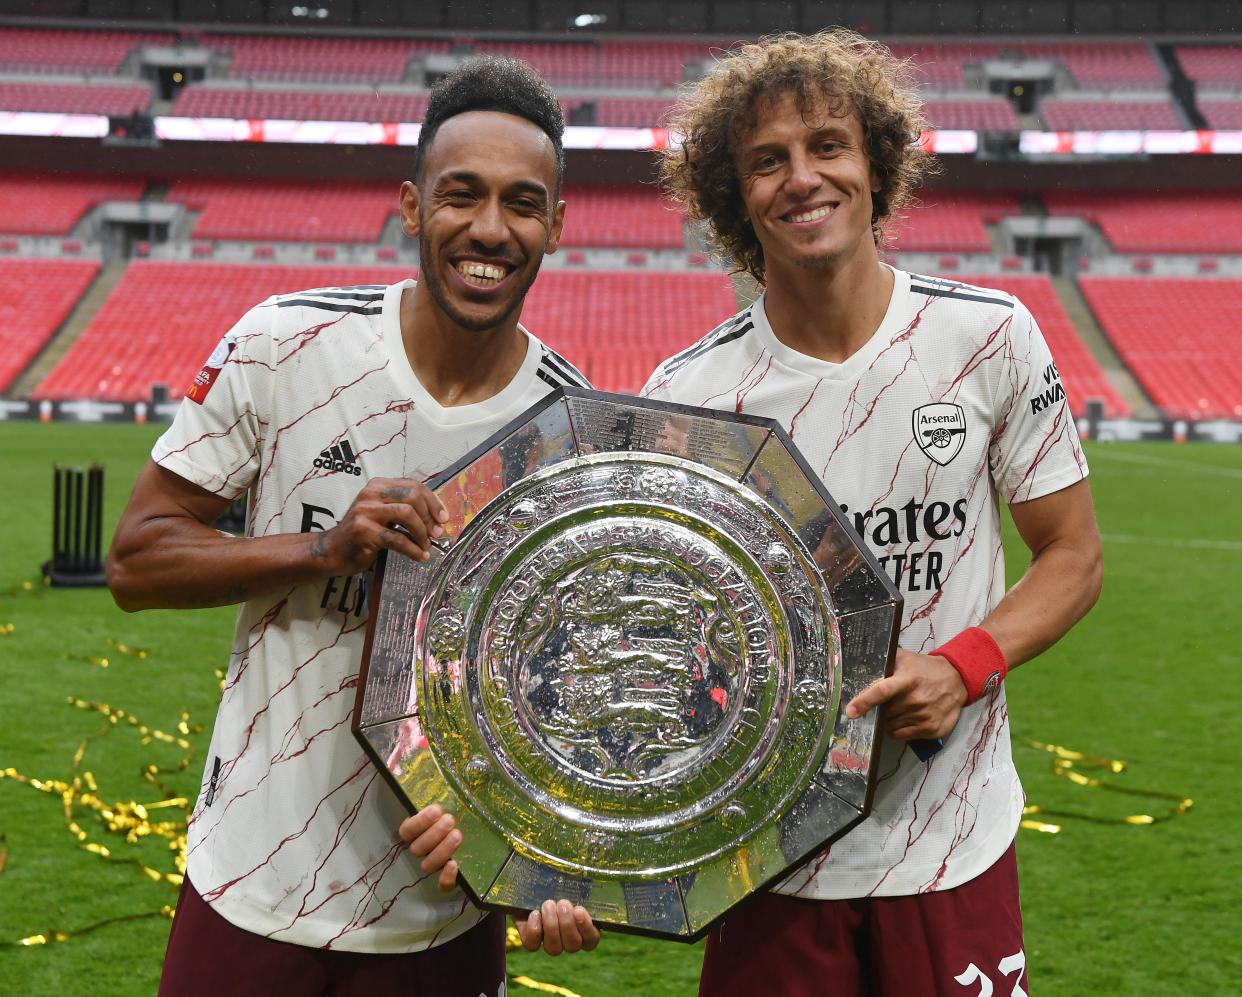 Arsenal beat Liverpool to win the Community Shield (Getty)